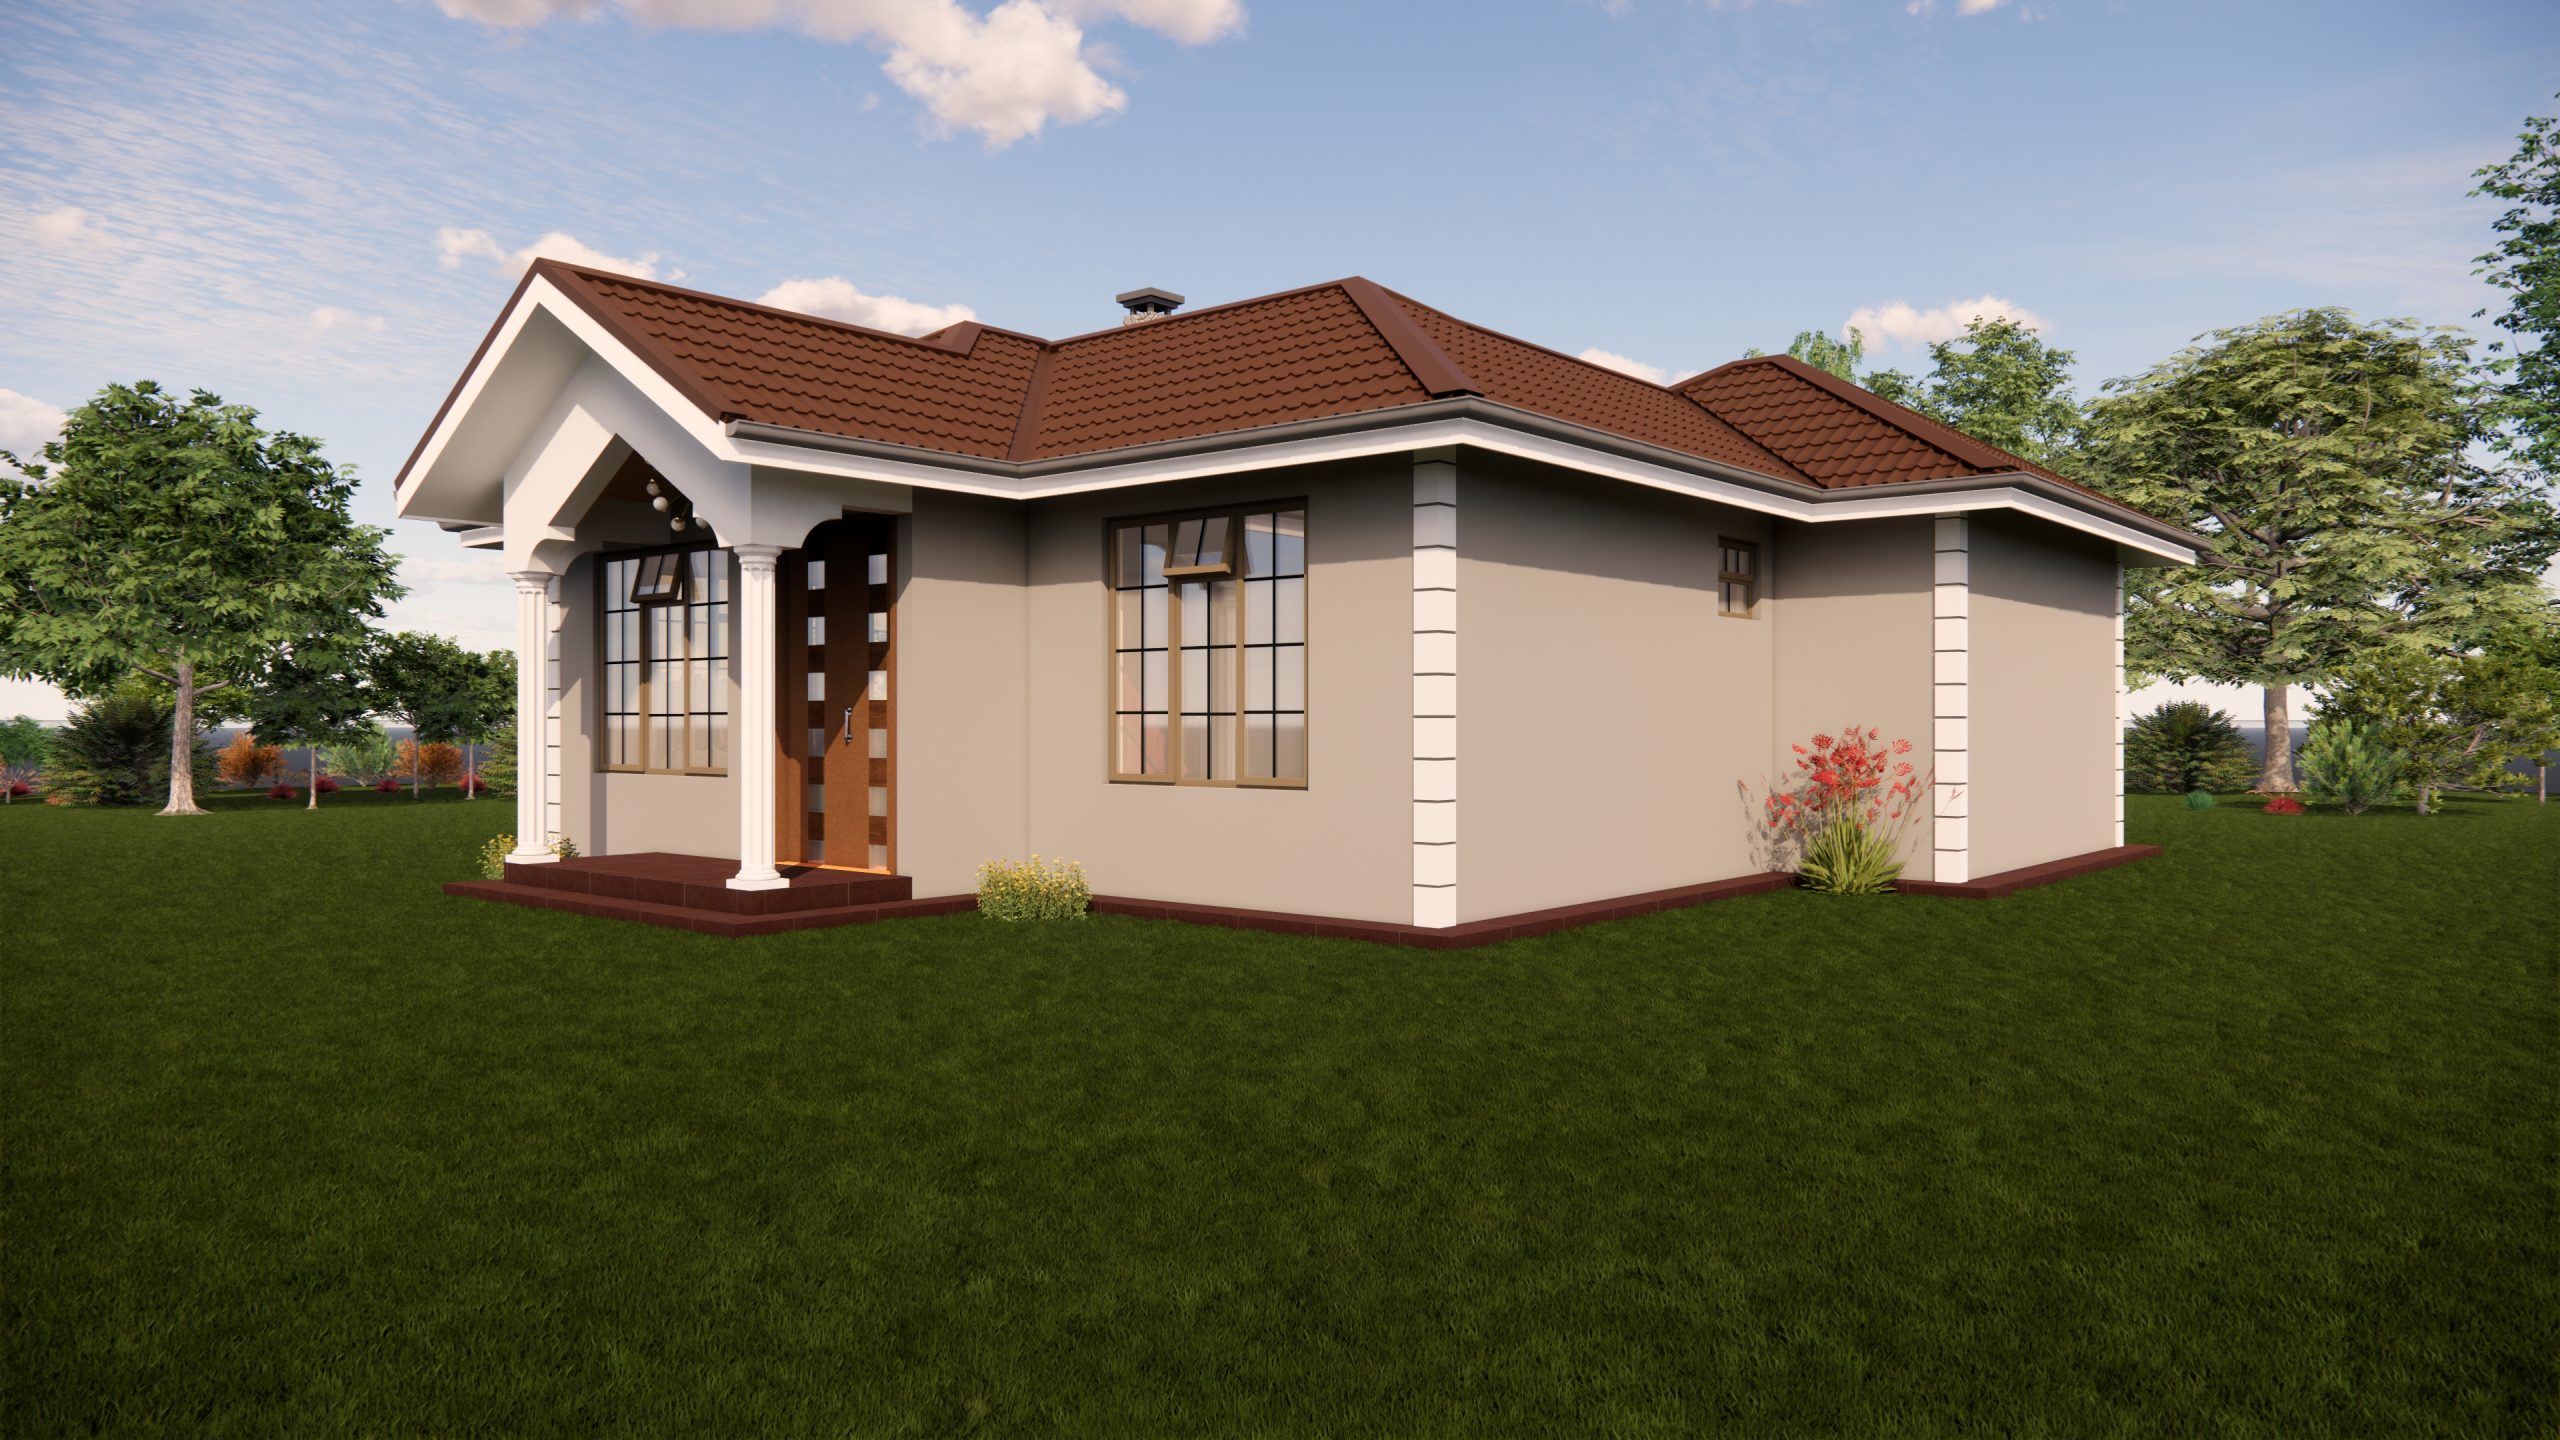 A Graceful Two Bedroom Bungalow House Plan